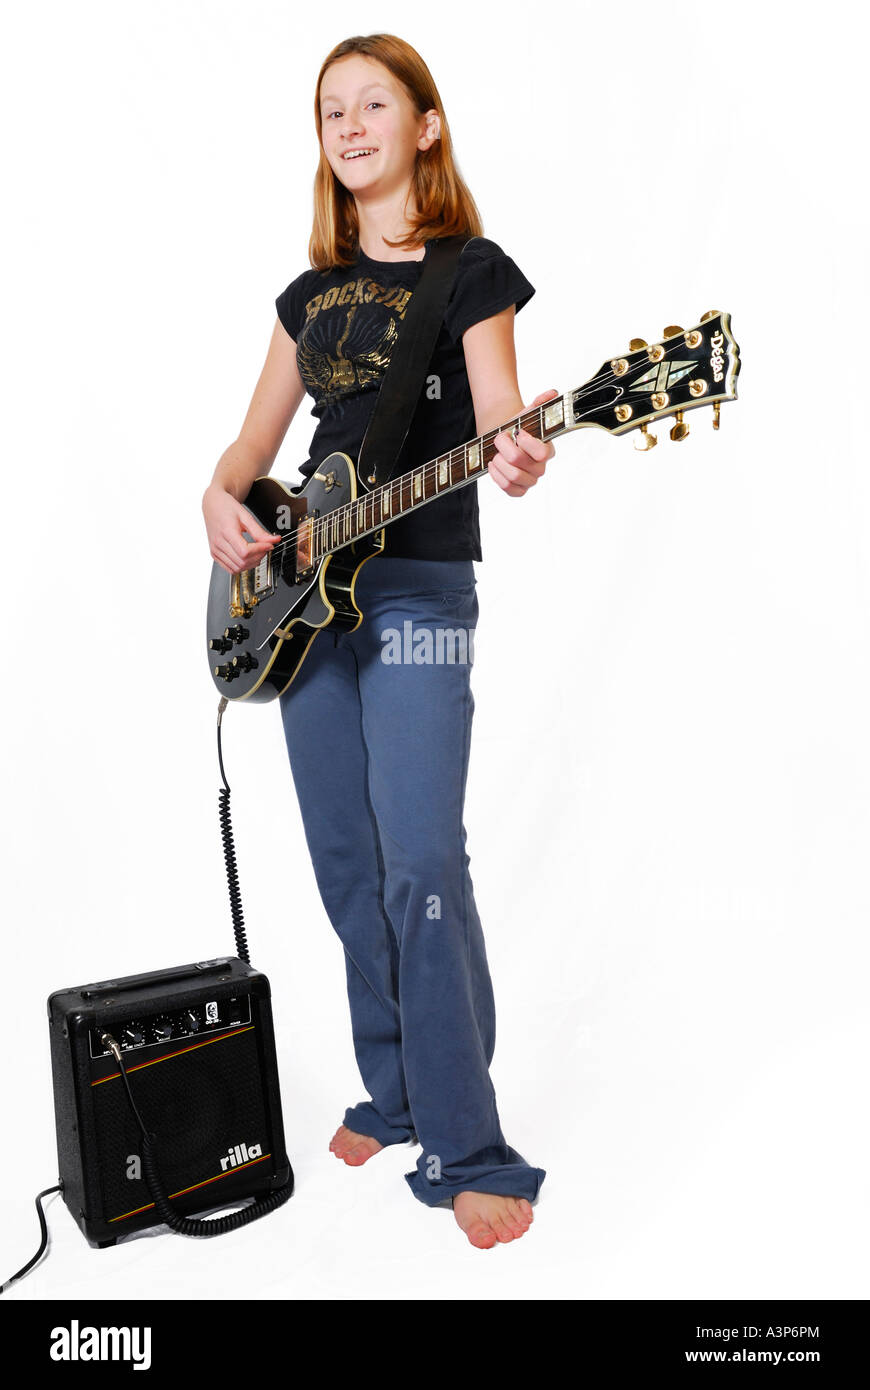 Smiling teenage girl playing electric guitar with amplifier on white  background Stock Photo - Alamy